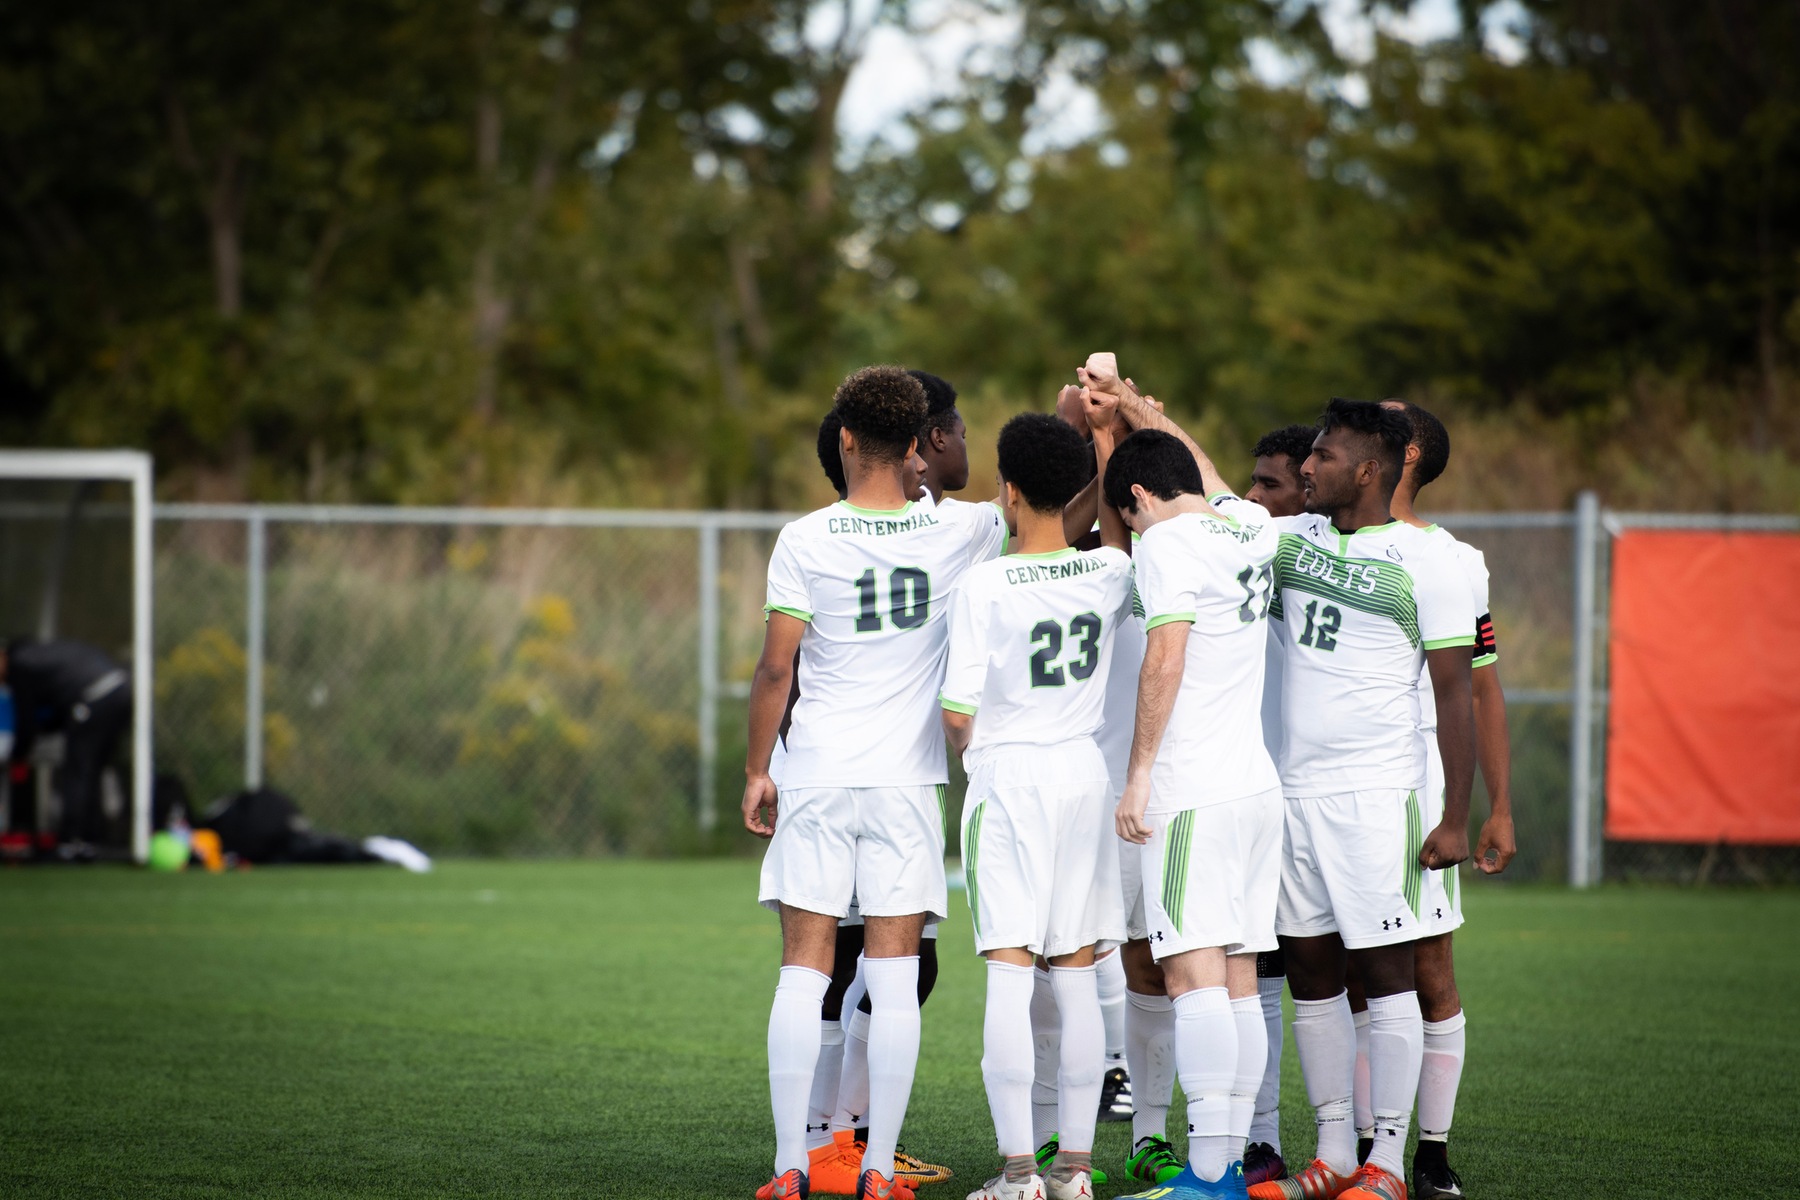 The team's camaraderie looks to propel them to a historic victory against the Sheridan Bruins tonight at home. (Via Dulay/Sports Information Officer) 